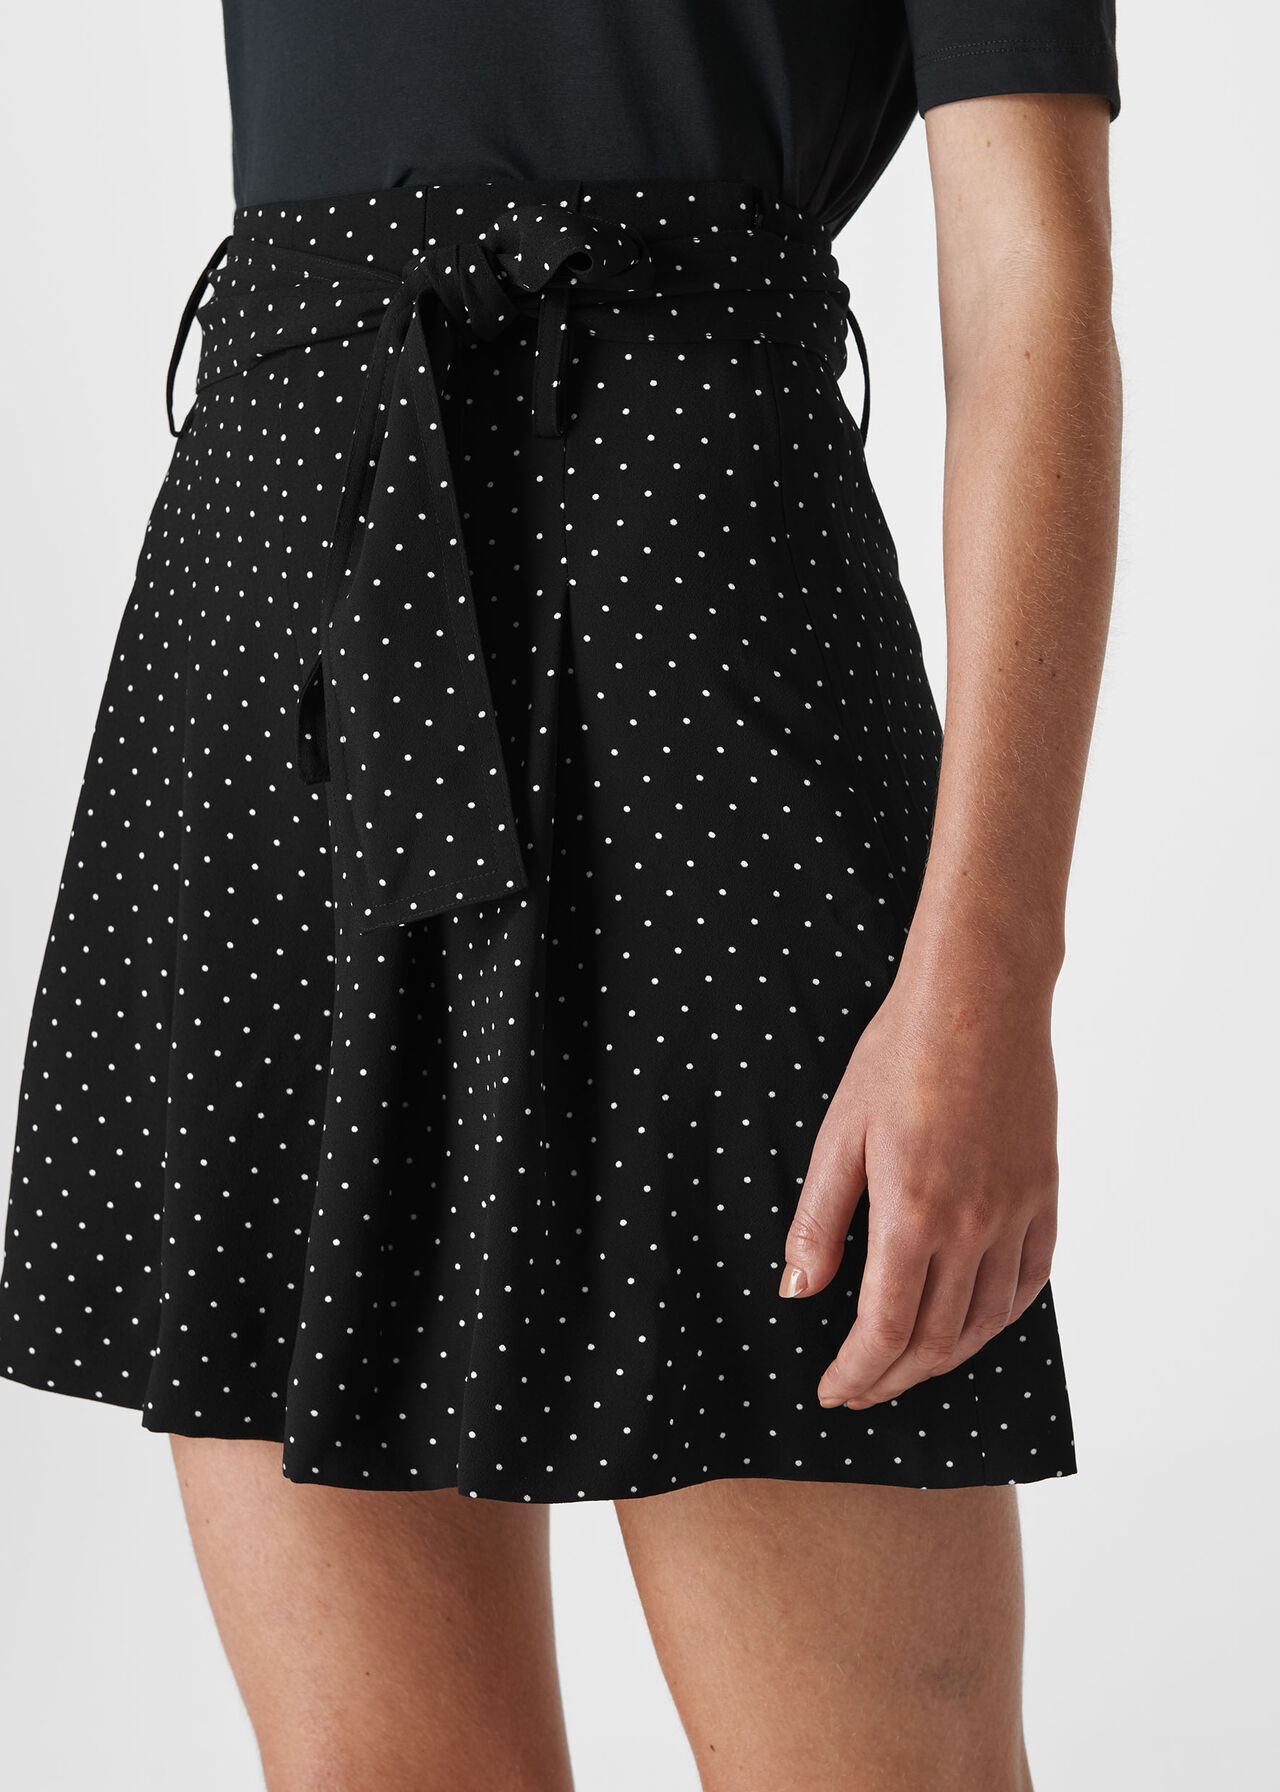 Spot Printed Short Black and White